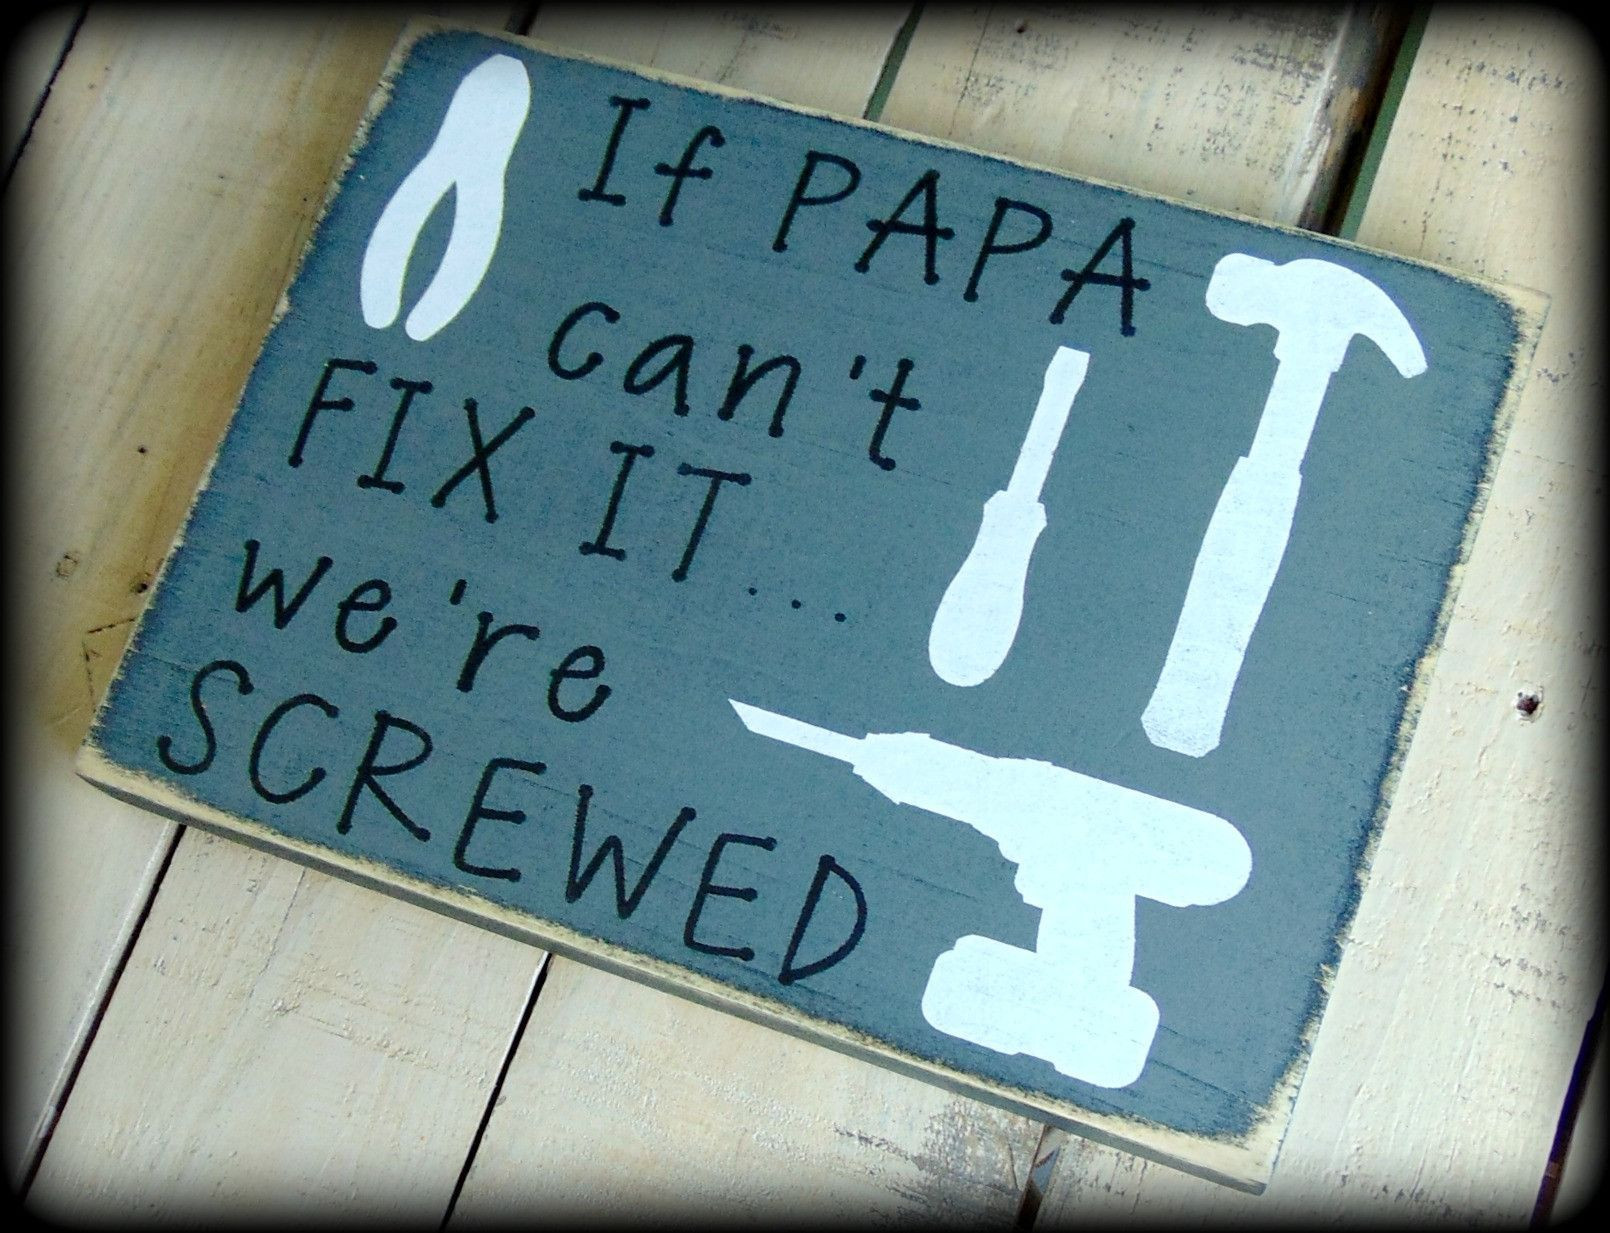 Birthday Gifts For Father
 If Papa Can t Fix It We re Screwed Rustic Wooden Sign